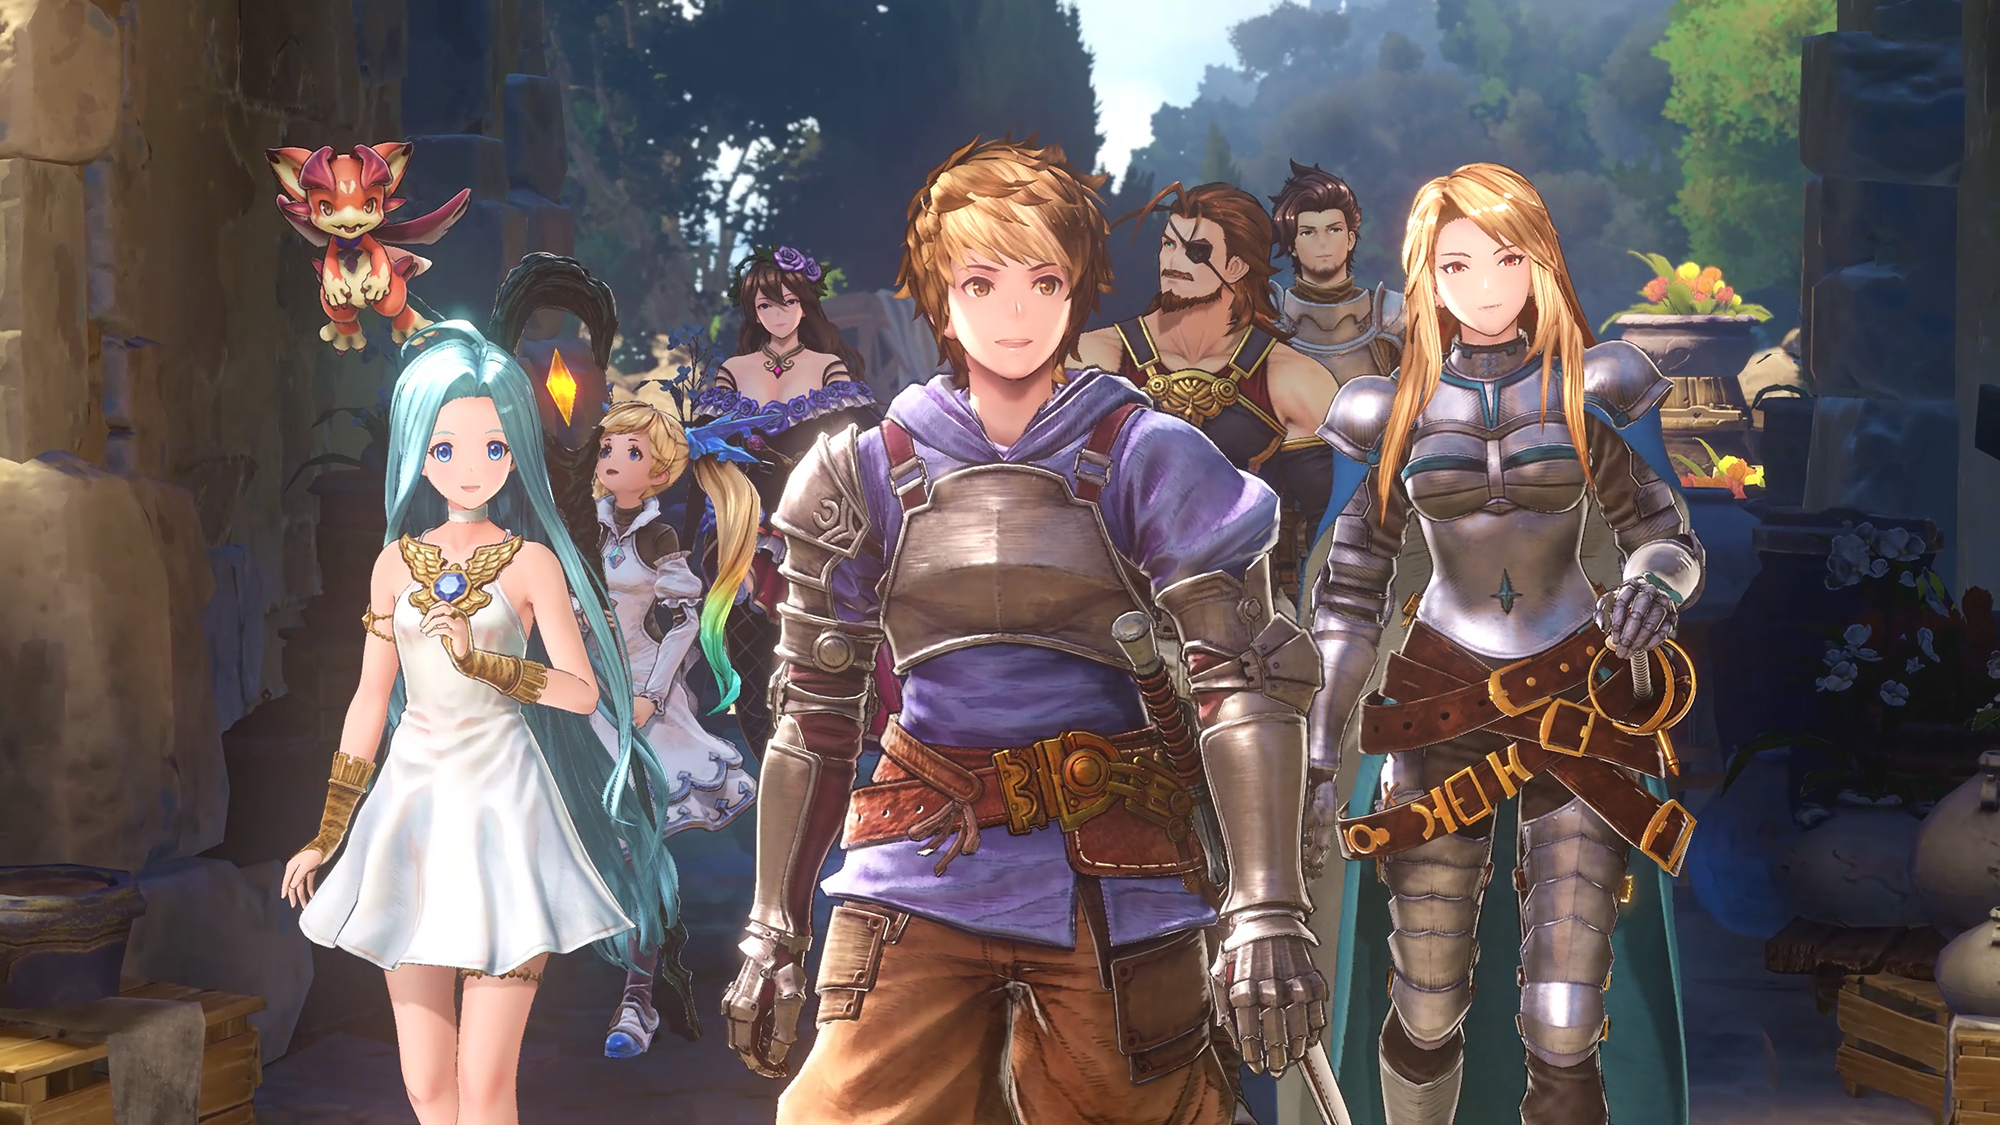 Granblue Fantasy: Relink is delayed to 2023 due to COVID19